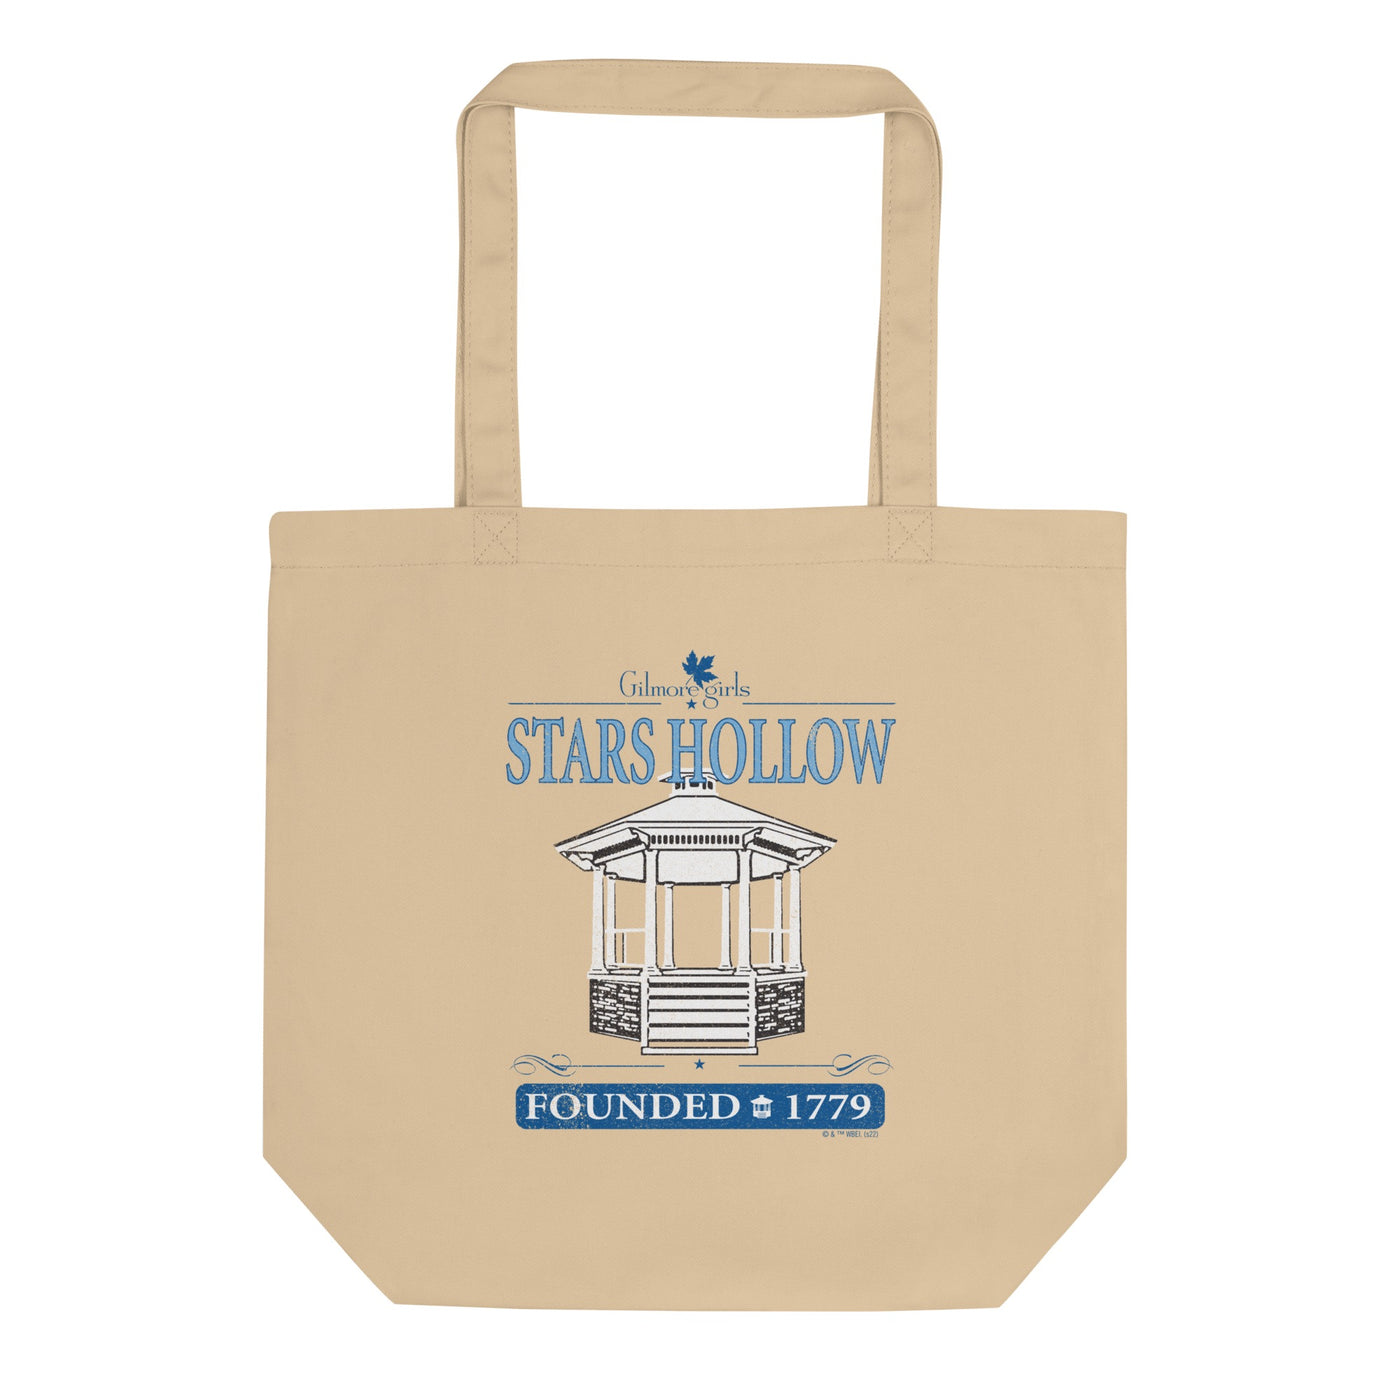 Gilmore Girls Stars Hollow Eco Tote Bag